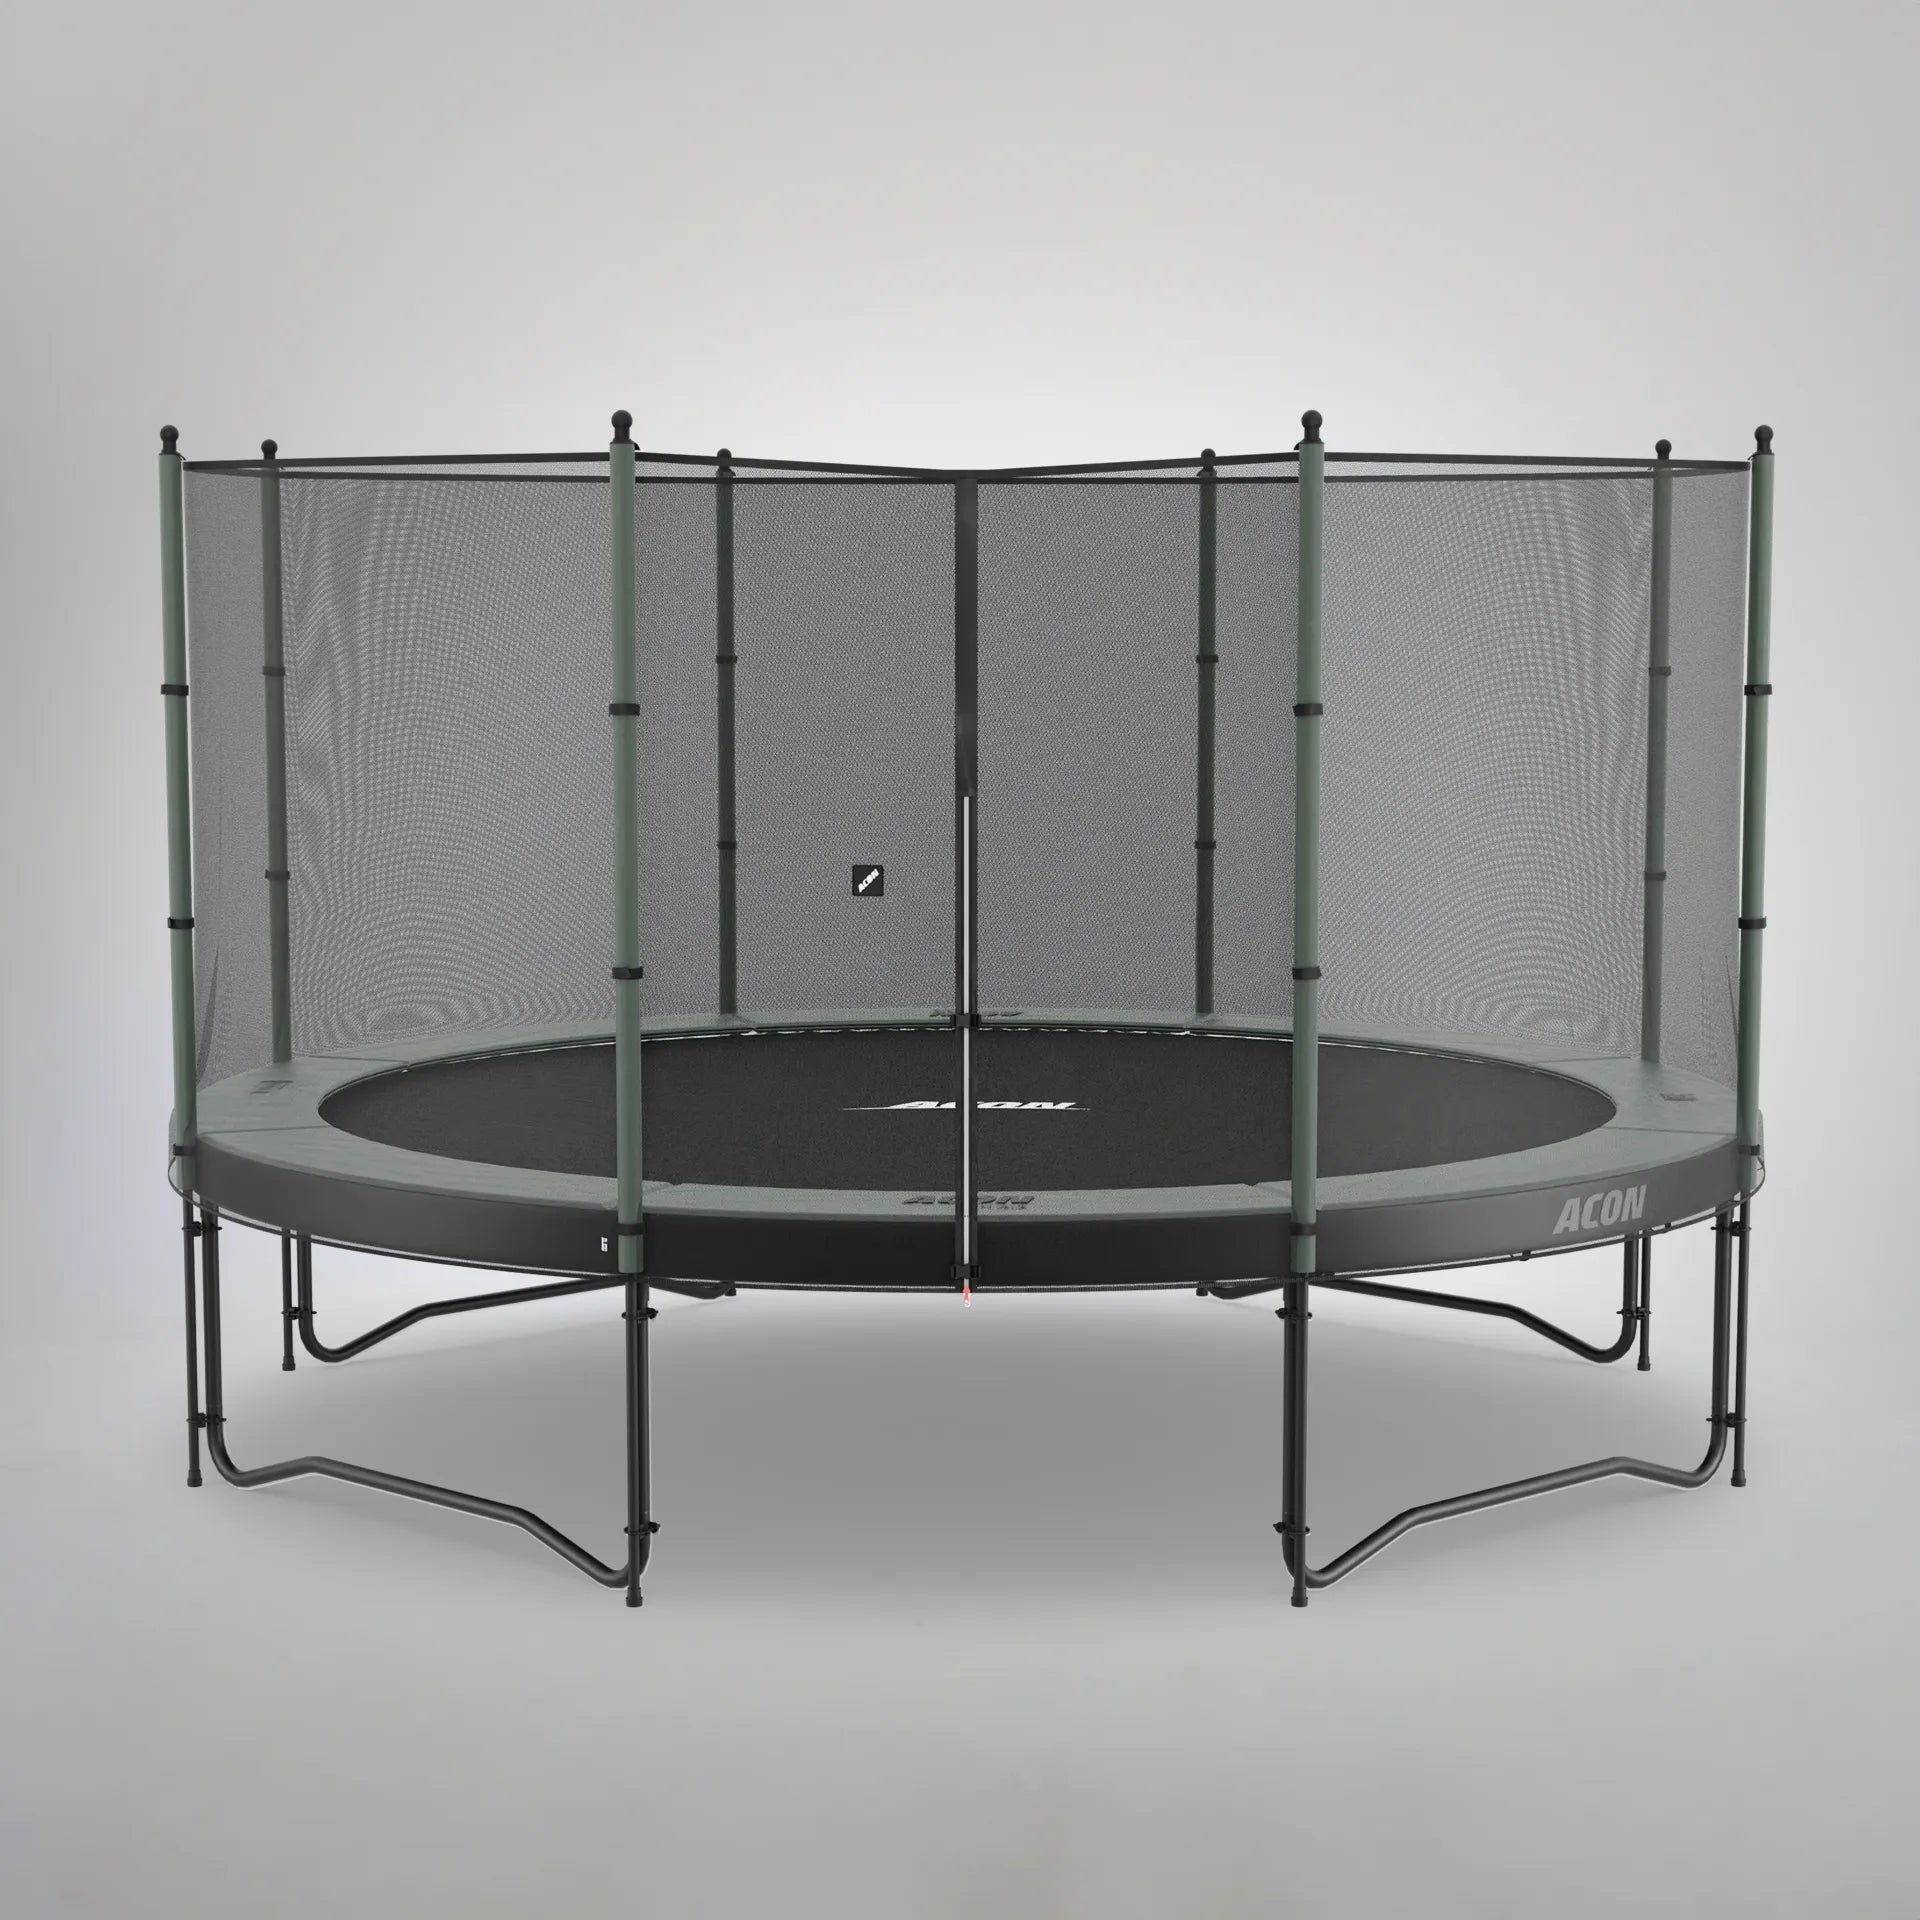 Placeholder image for round Acon Trampoline with Standard Net Assembly video.